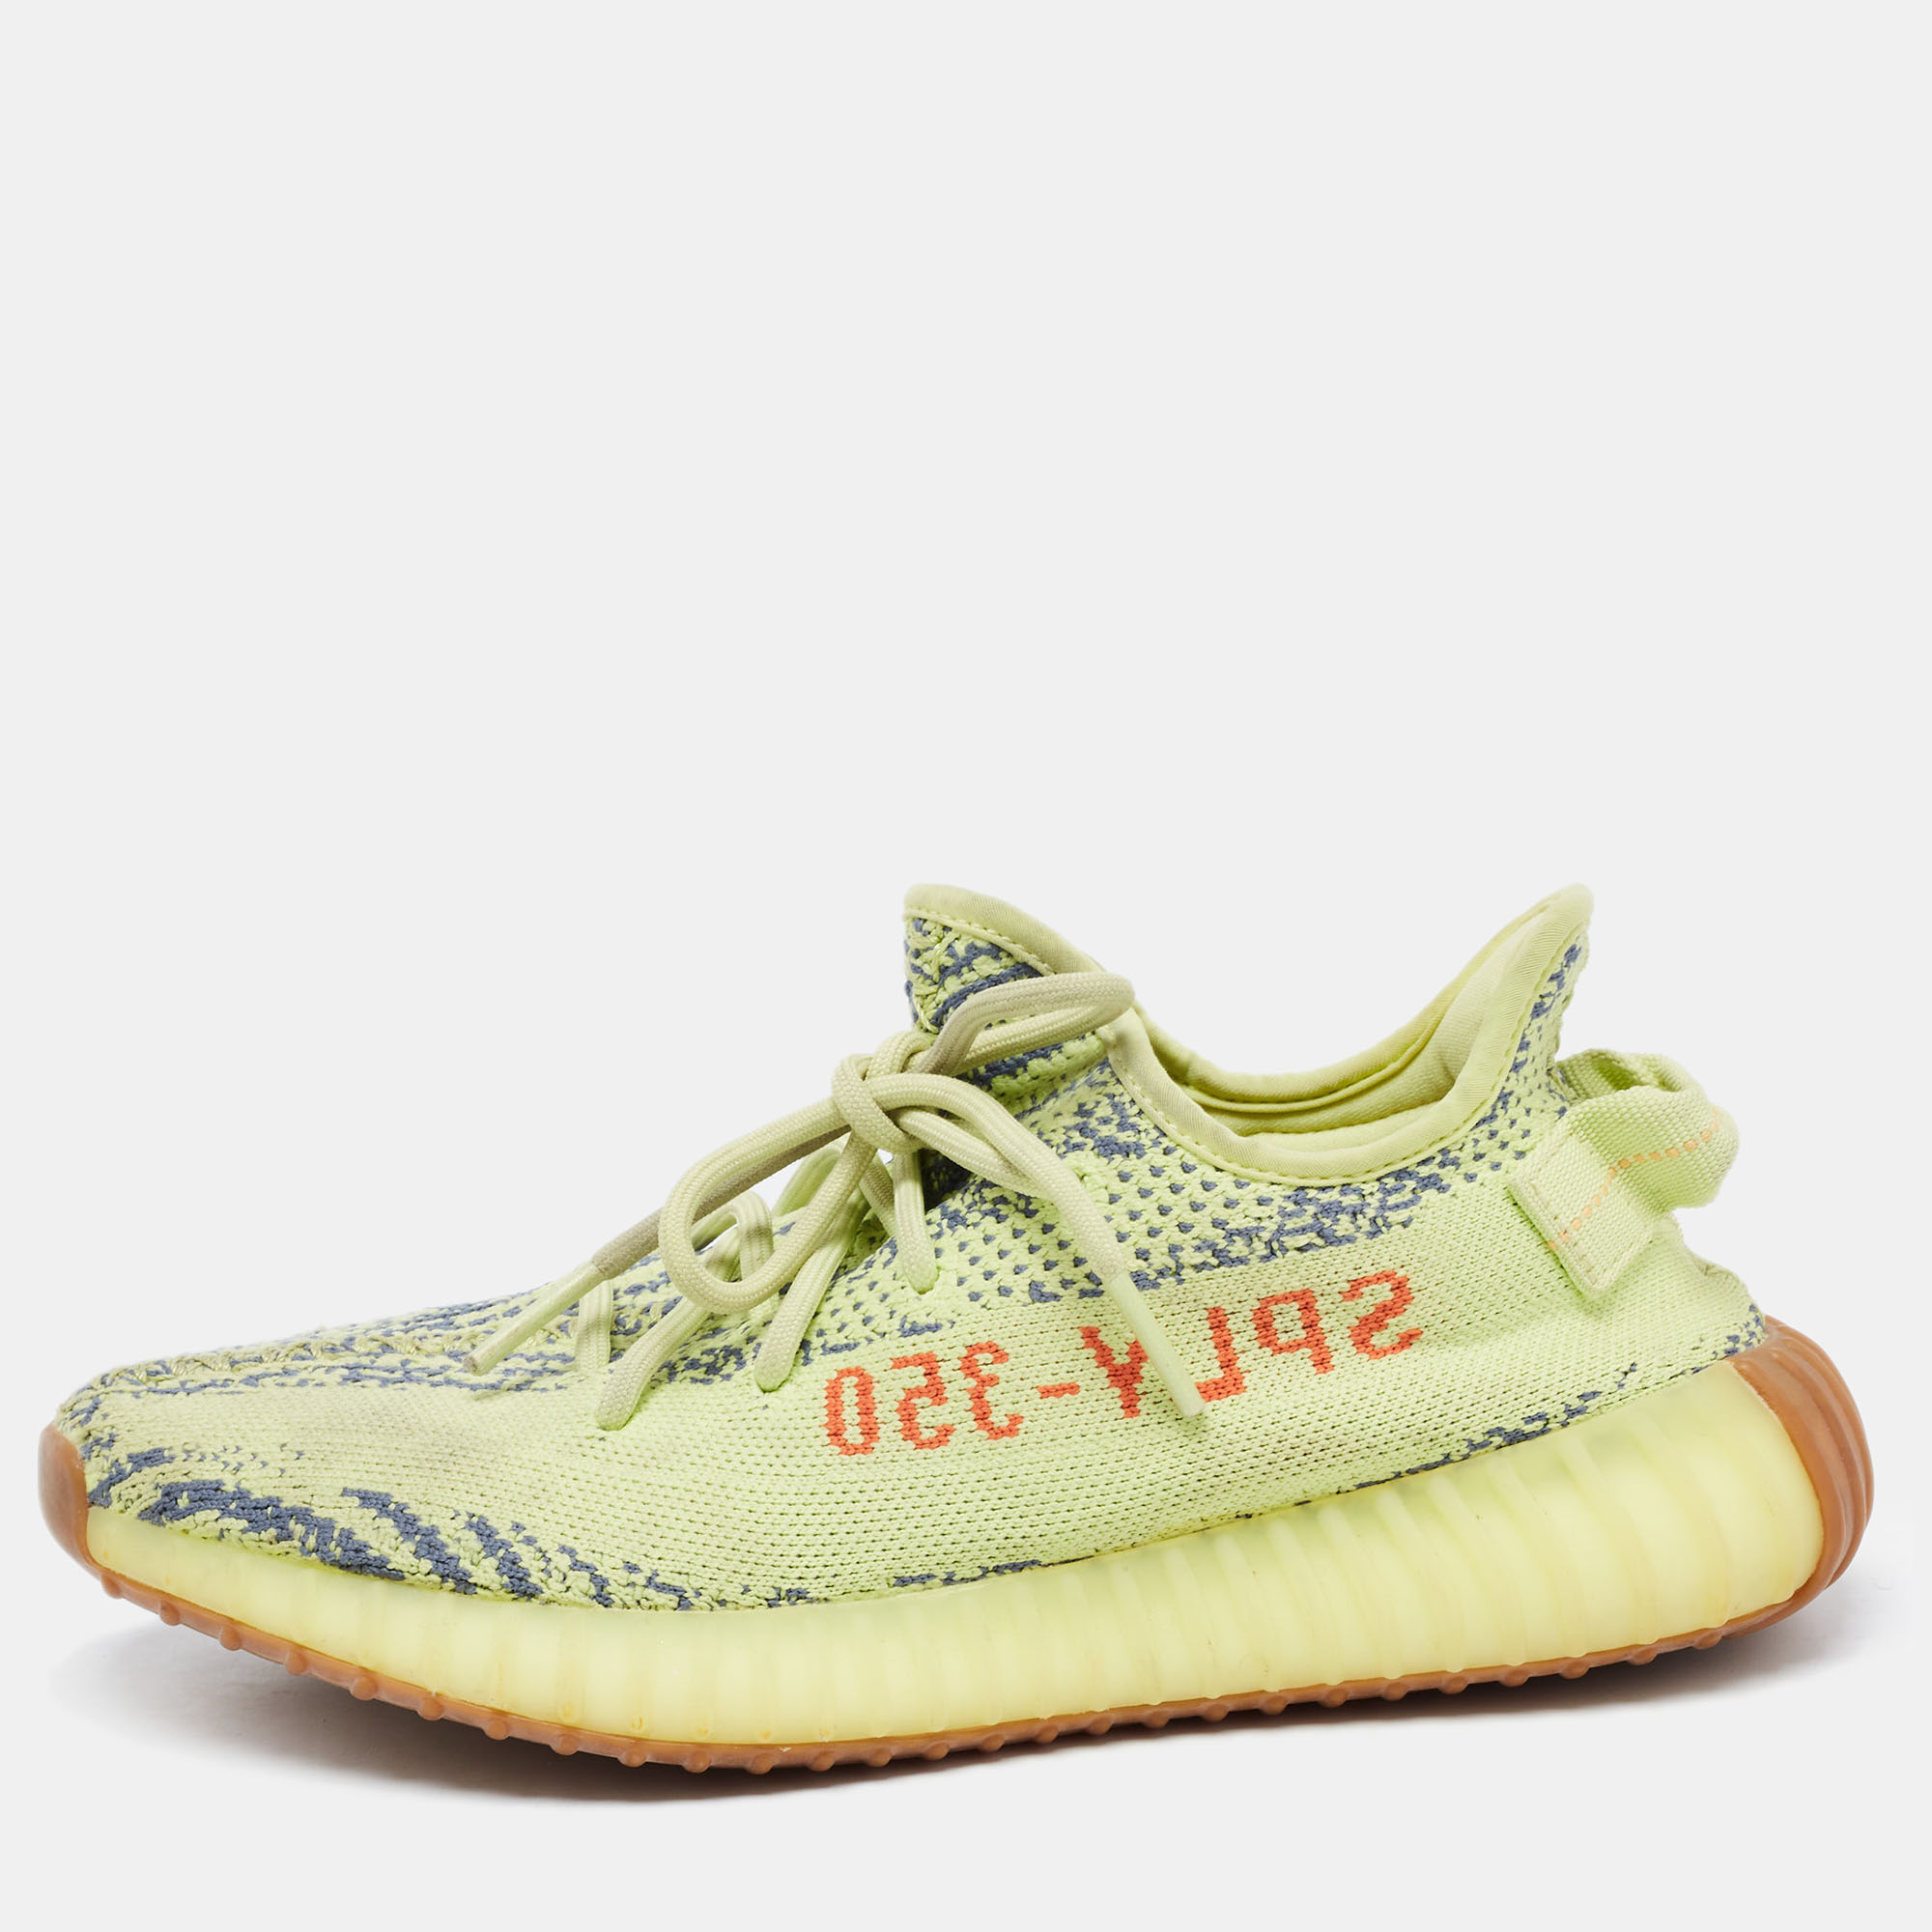 Yeezy x Adidas Neon Green Knit Fabric Boost 350 V2 Glow Sneakers Size 40